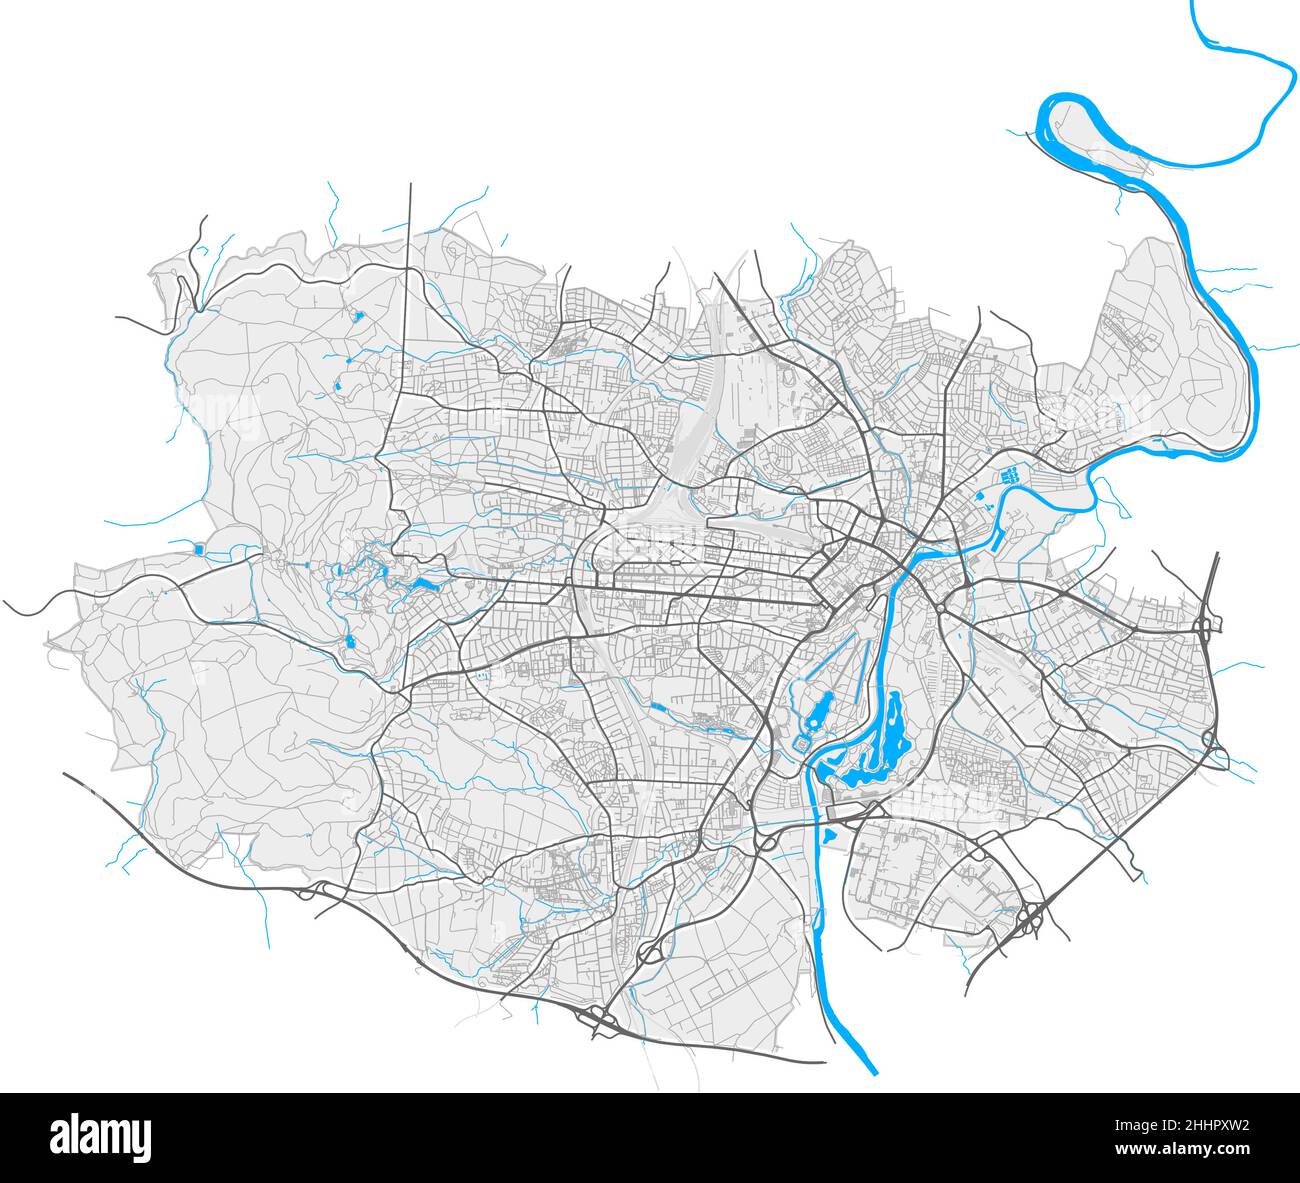 Kassel, Hesse, Germany high resolution vector map with city boundaries and editable paths. White outlines for main roads. Many detailed paths. Blue sh Stock Vector